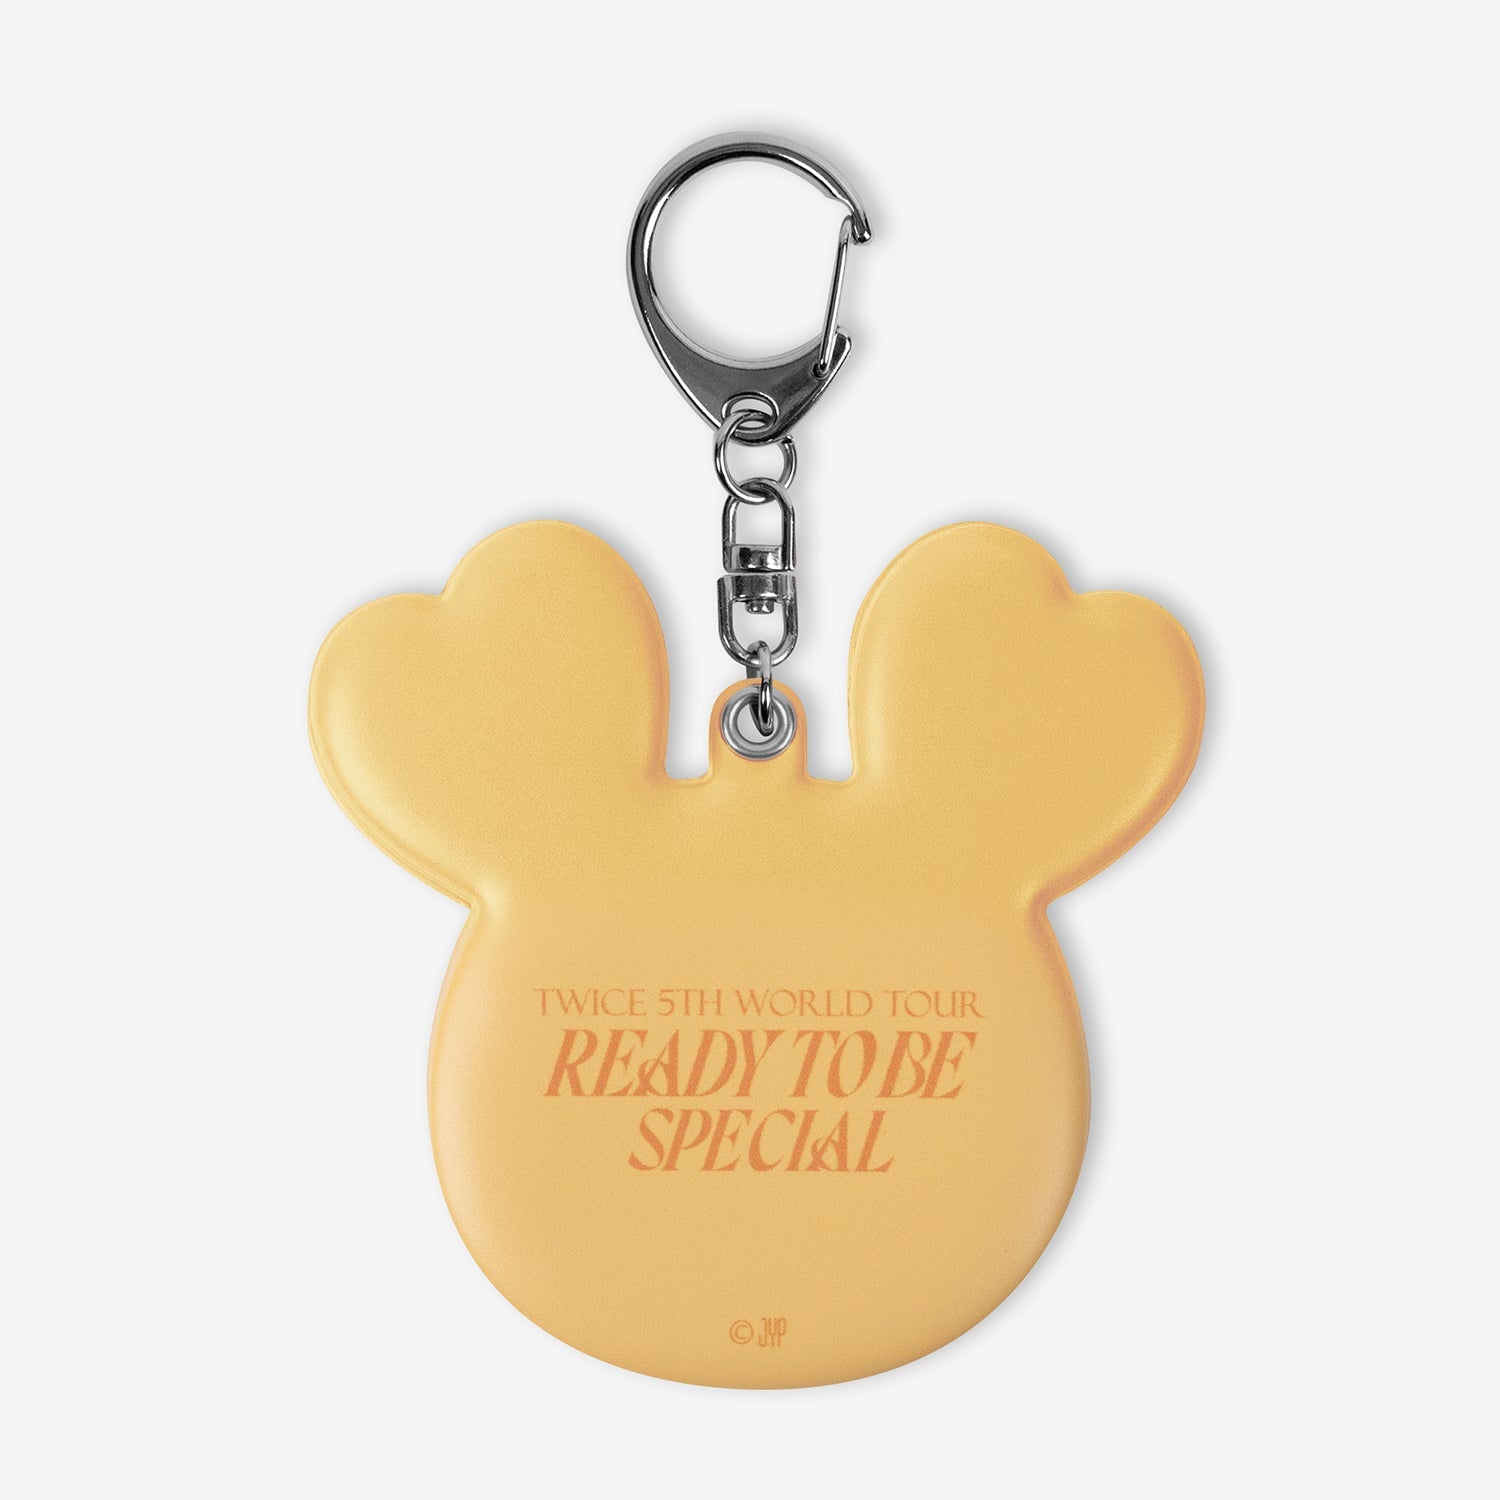 TWICE LOVELYS SLIDE MIRROR - JIVELY / TWICE『READY TO BE SPECIAL』